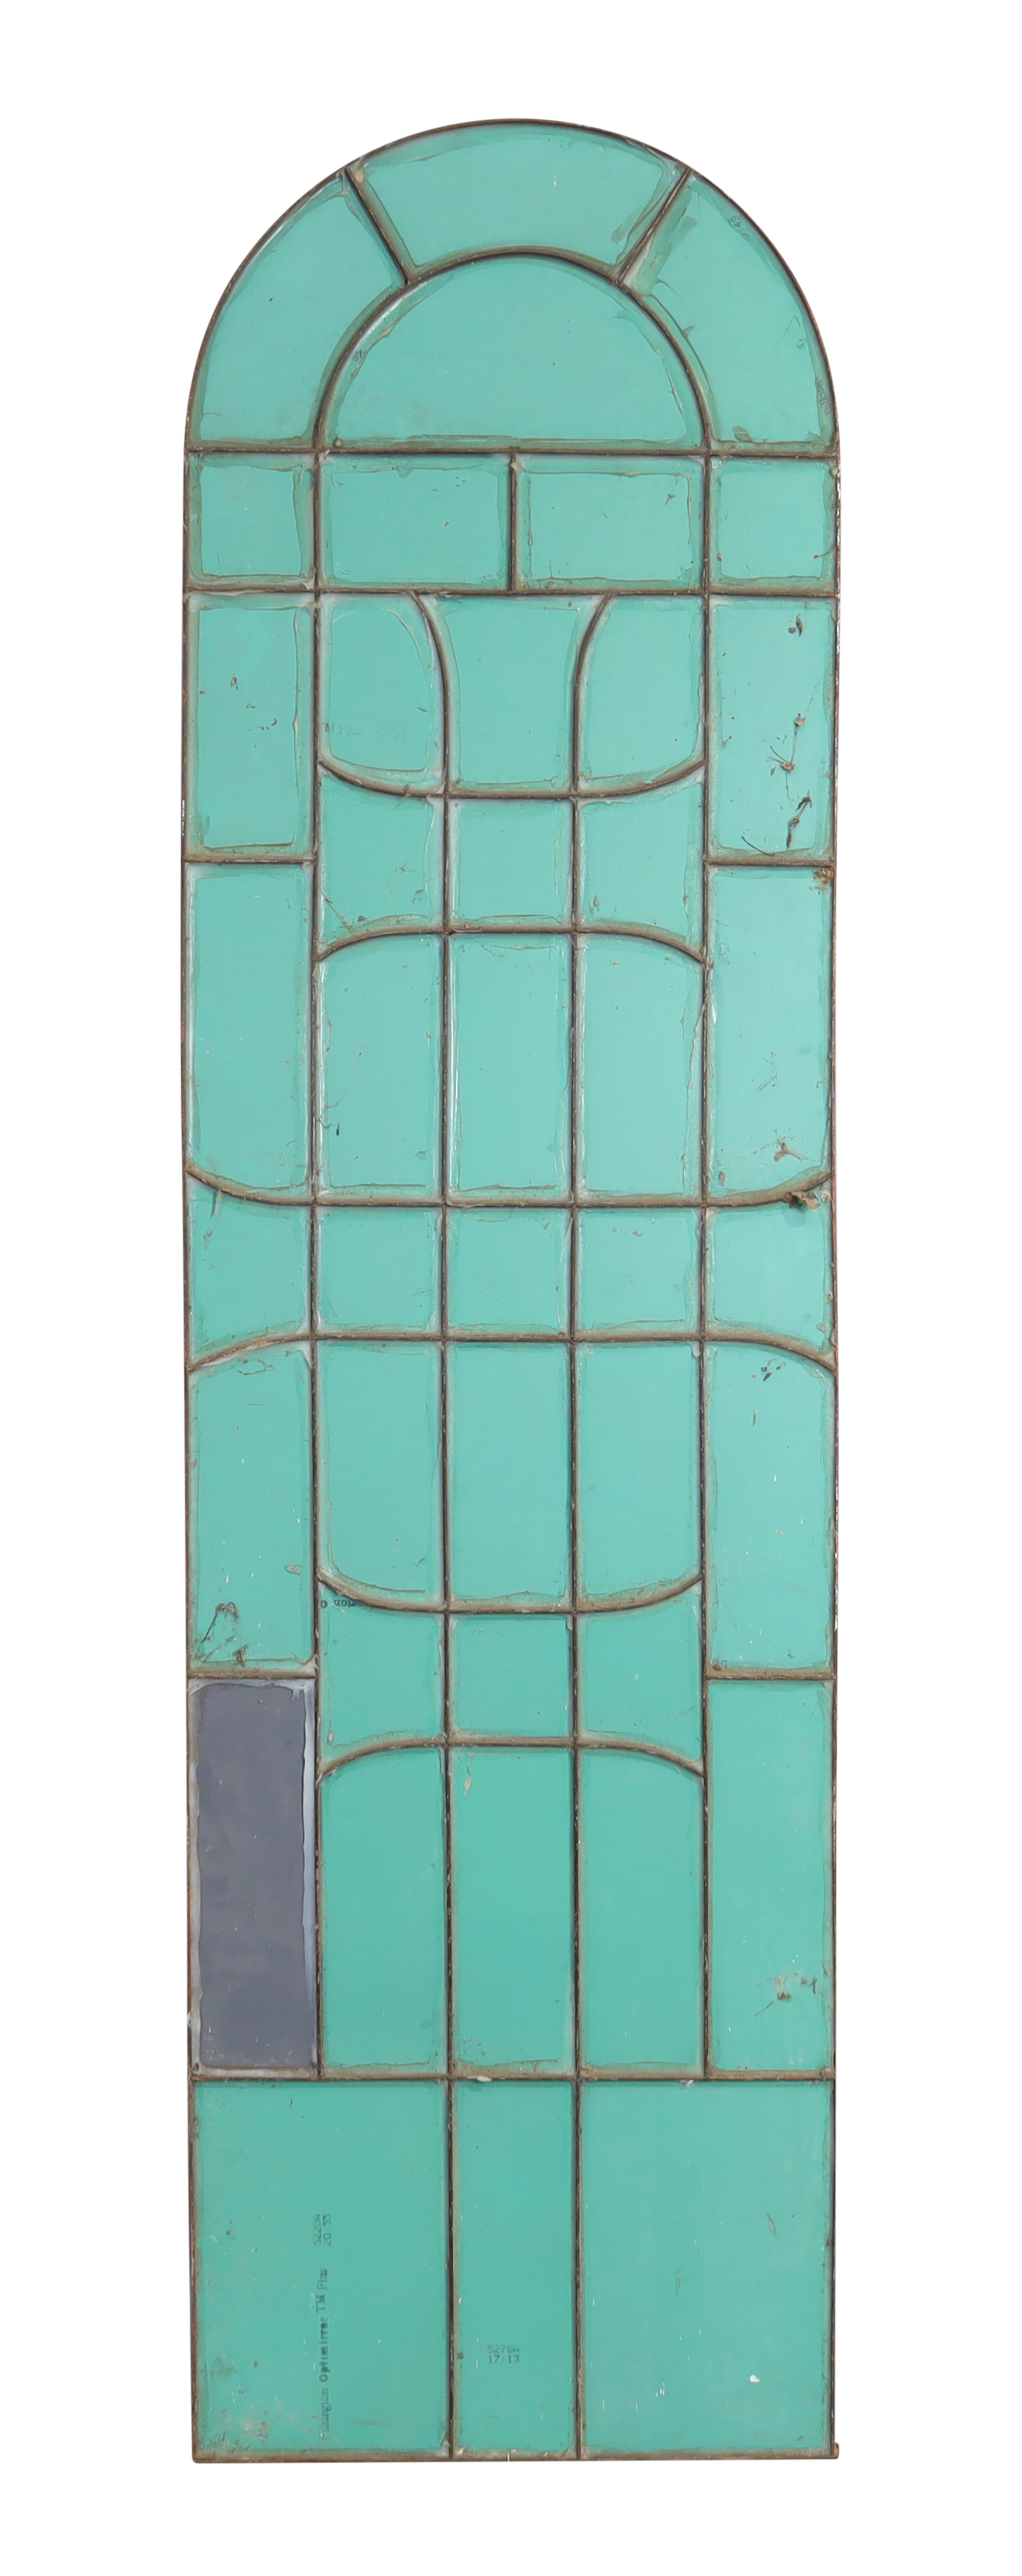 An iron framed sectional garden mirror, 20th century, with arched top, 272cm x 77cm - Image 2 of 2